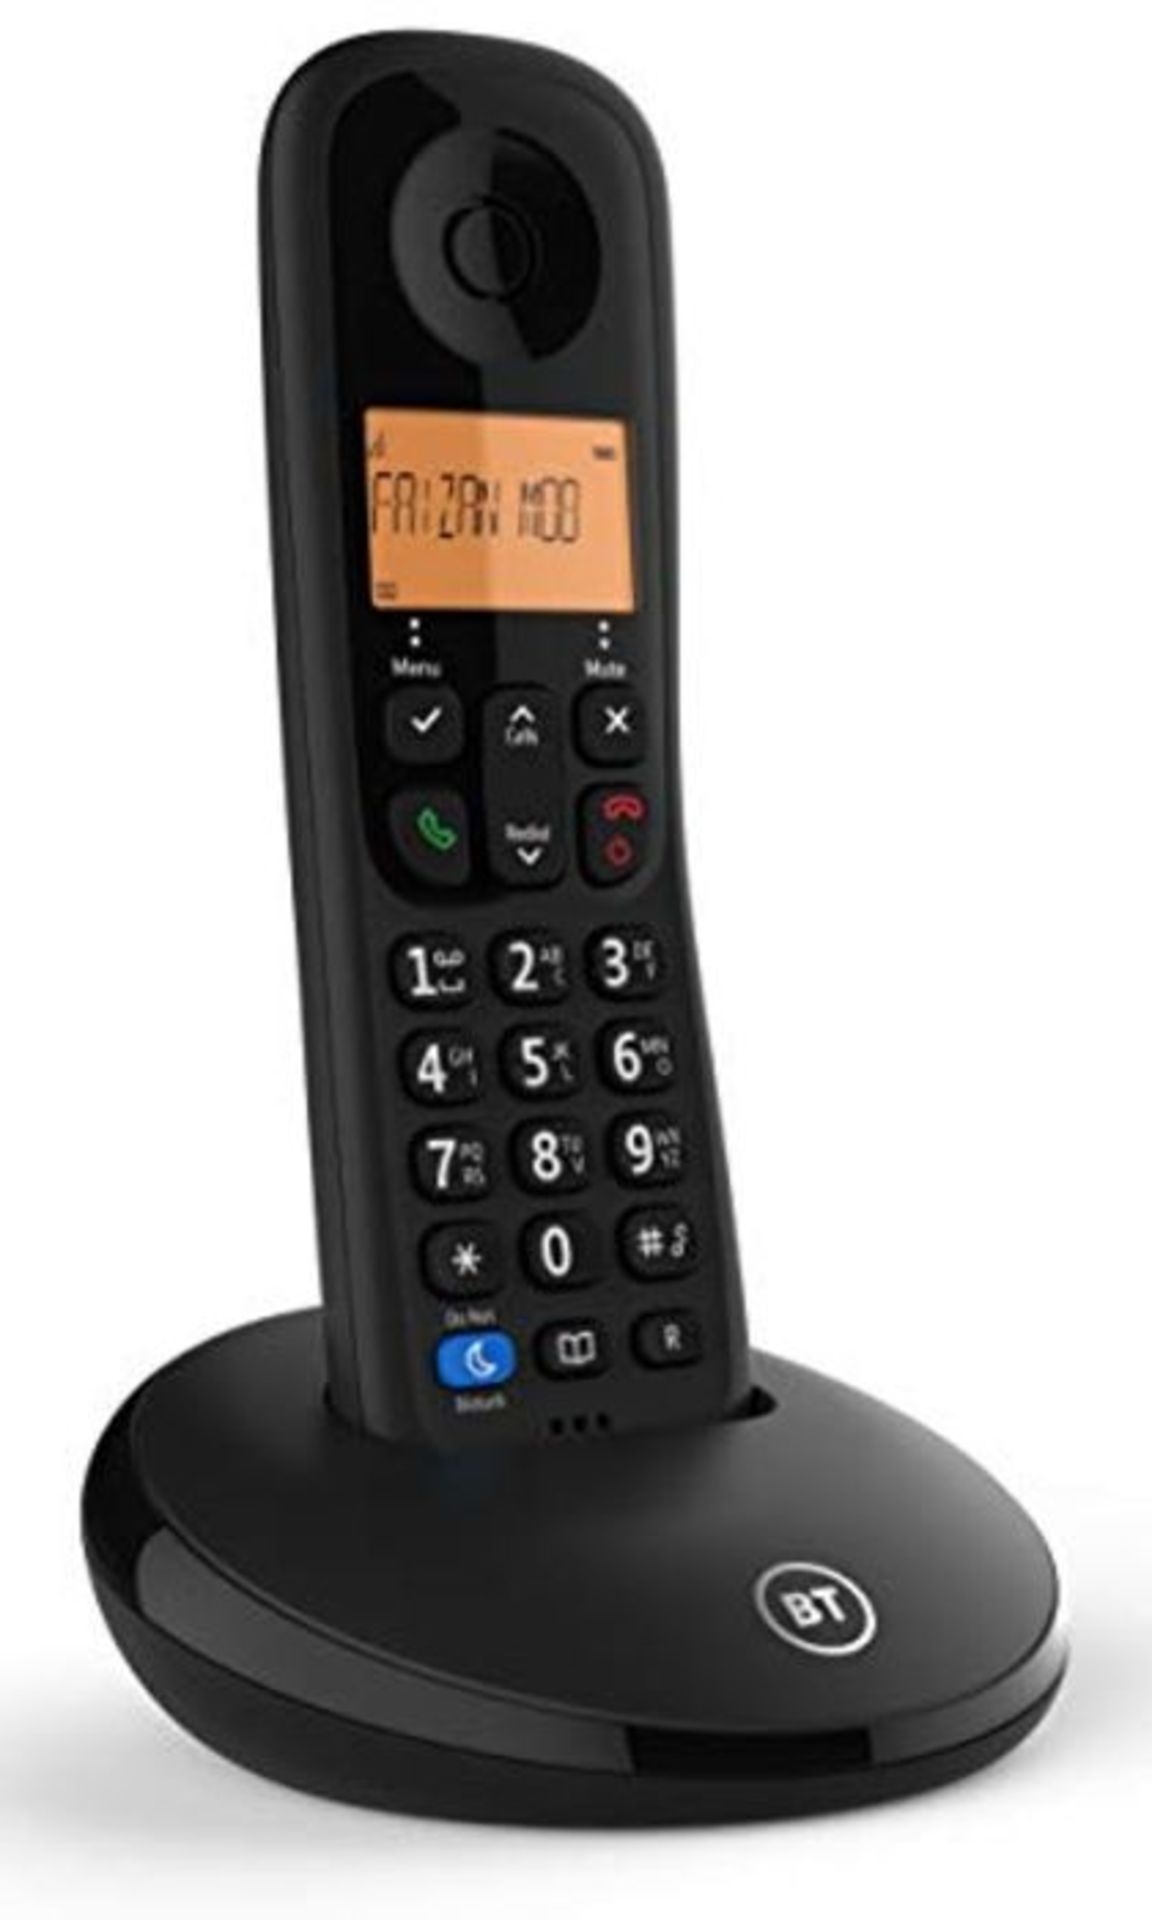 BT Everyday Cordless Home Phone with Basic Call Blocking, Single Handset Pack, Black